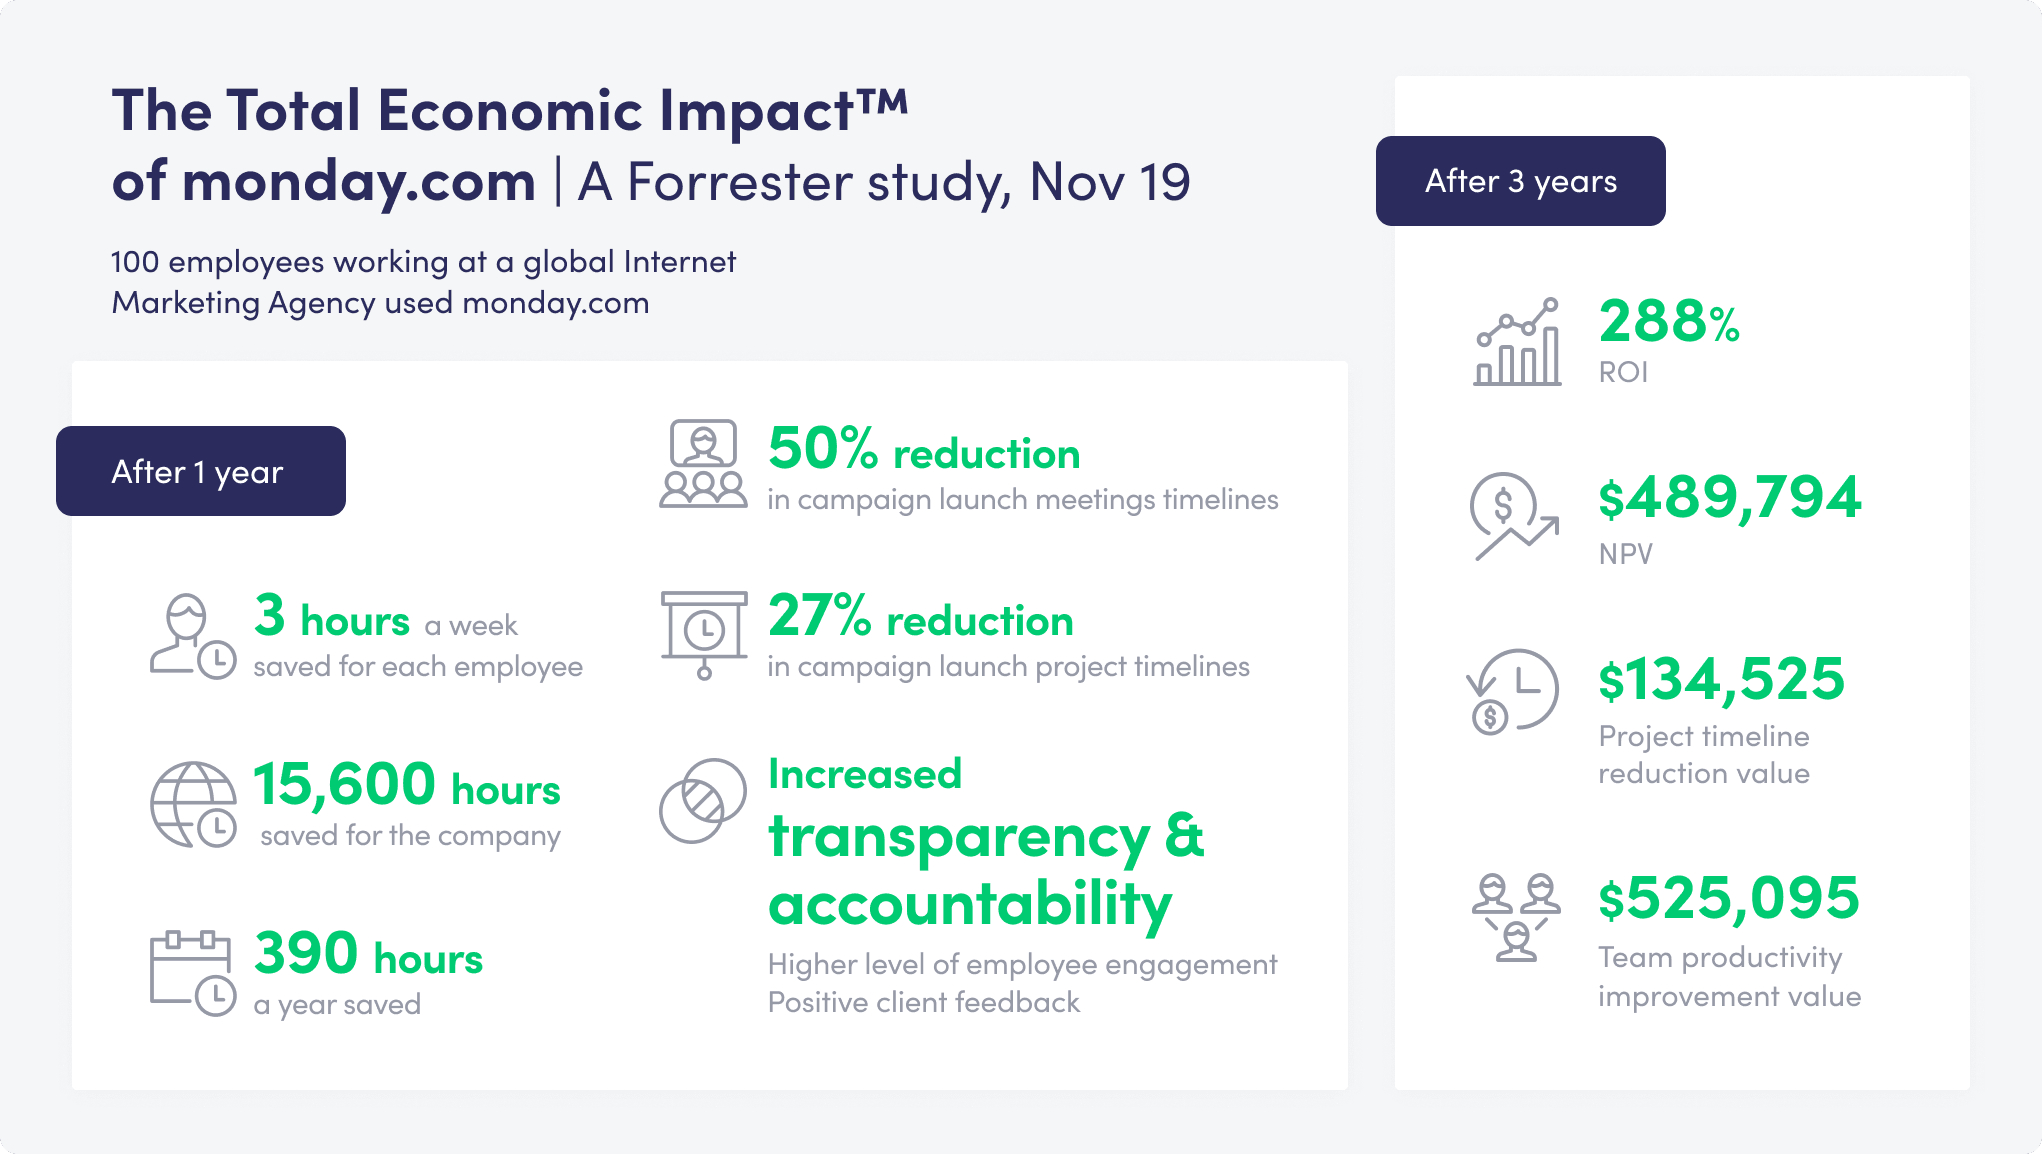 Forrester Study showing Monday.com results